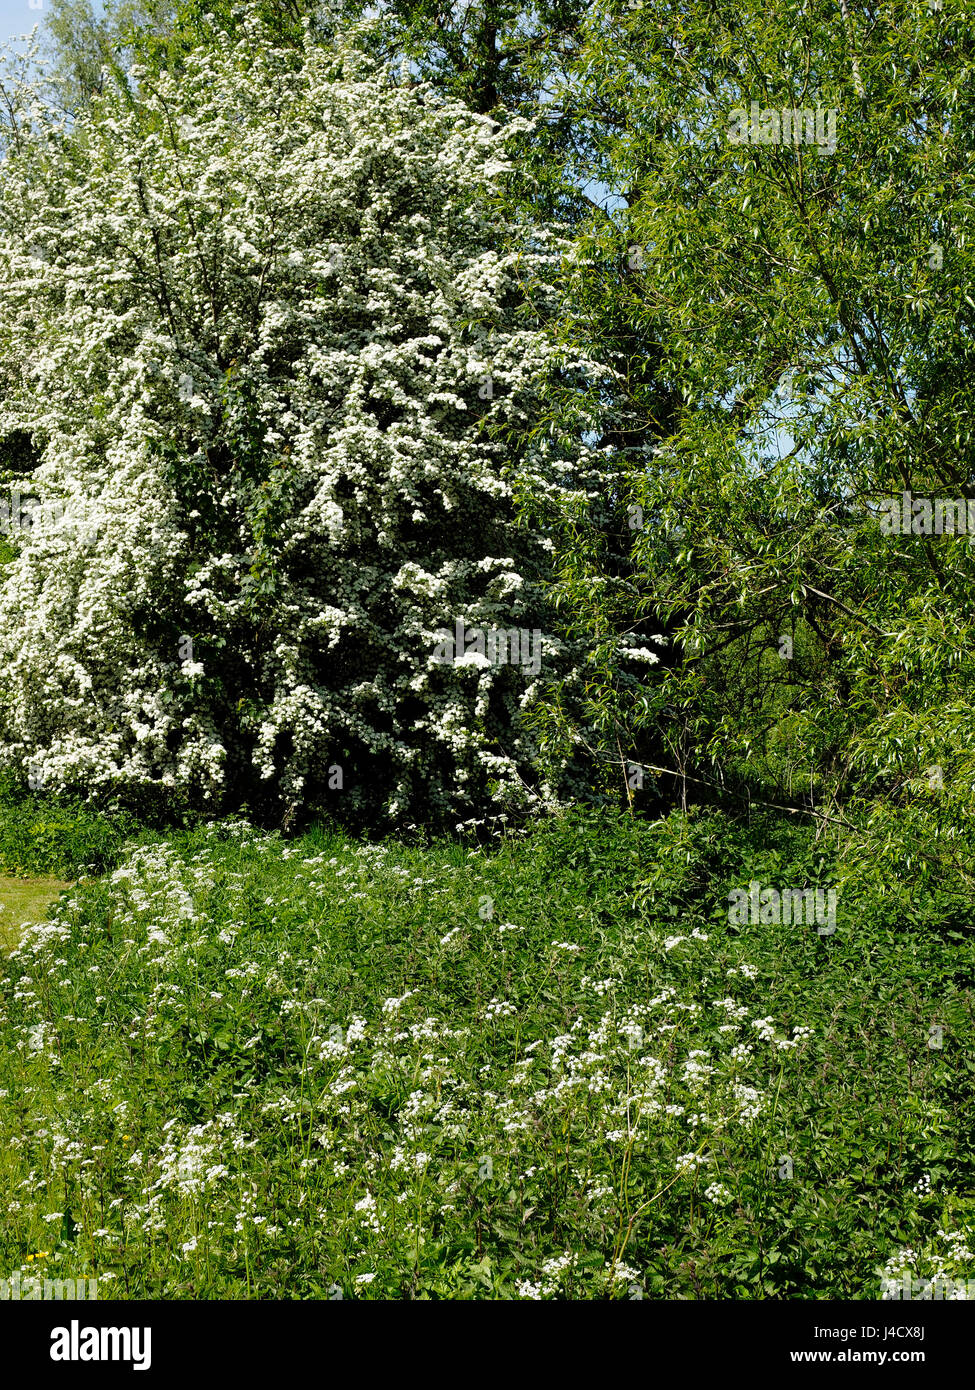 A hawthorn tree in full bloom on a sunny day in May with white cow parsley in the foreground. Stock Photo